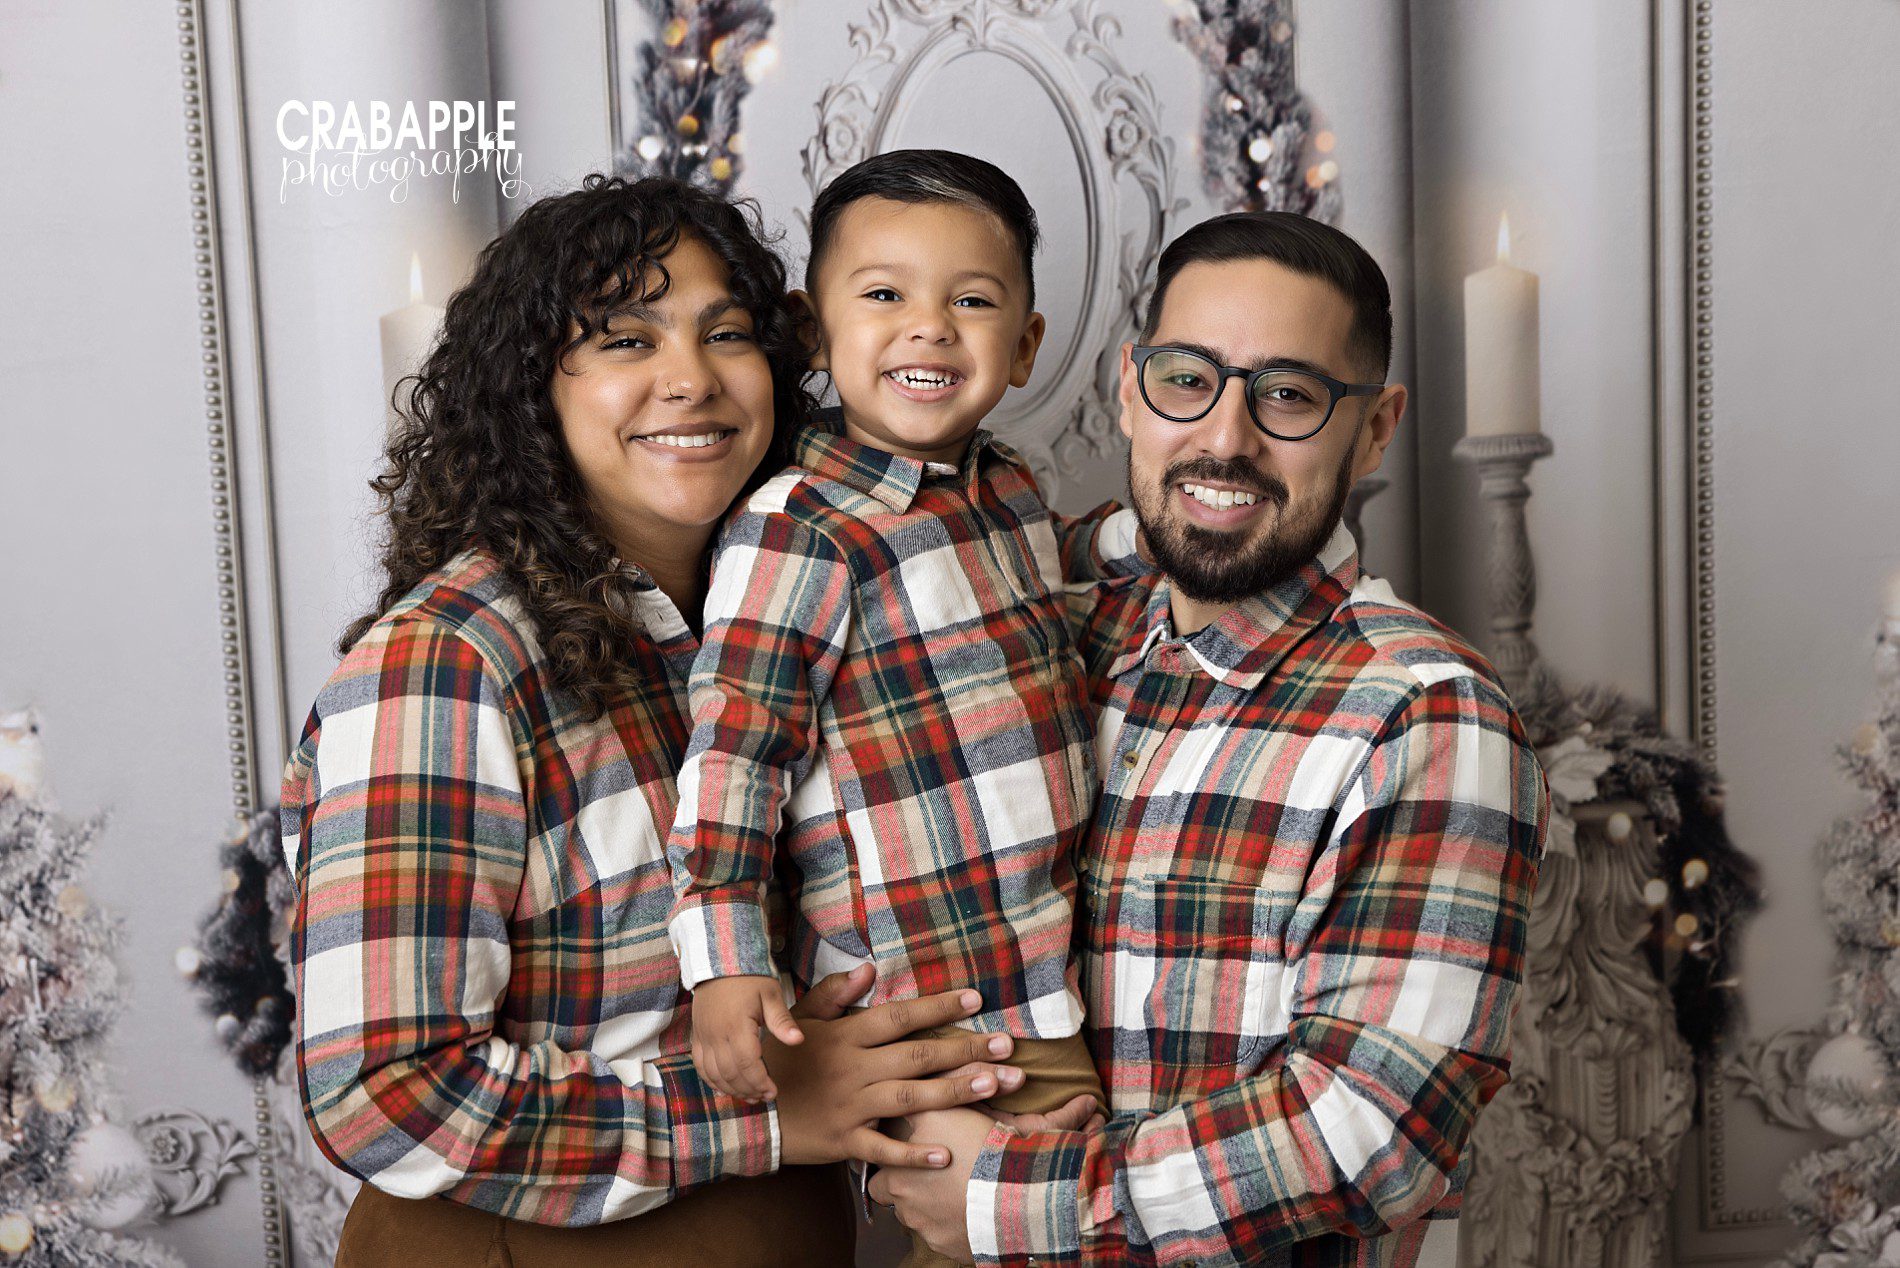 matching outfits for holiday family photos